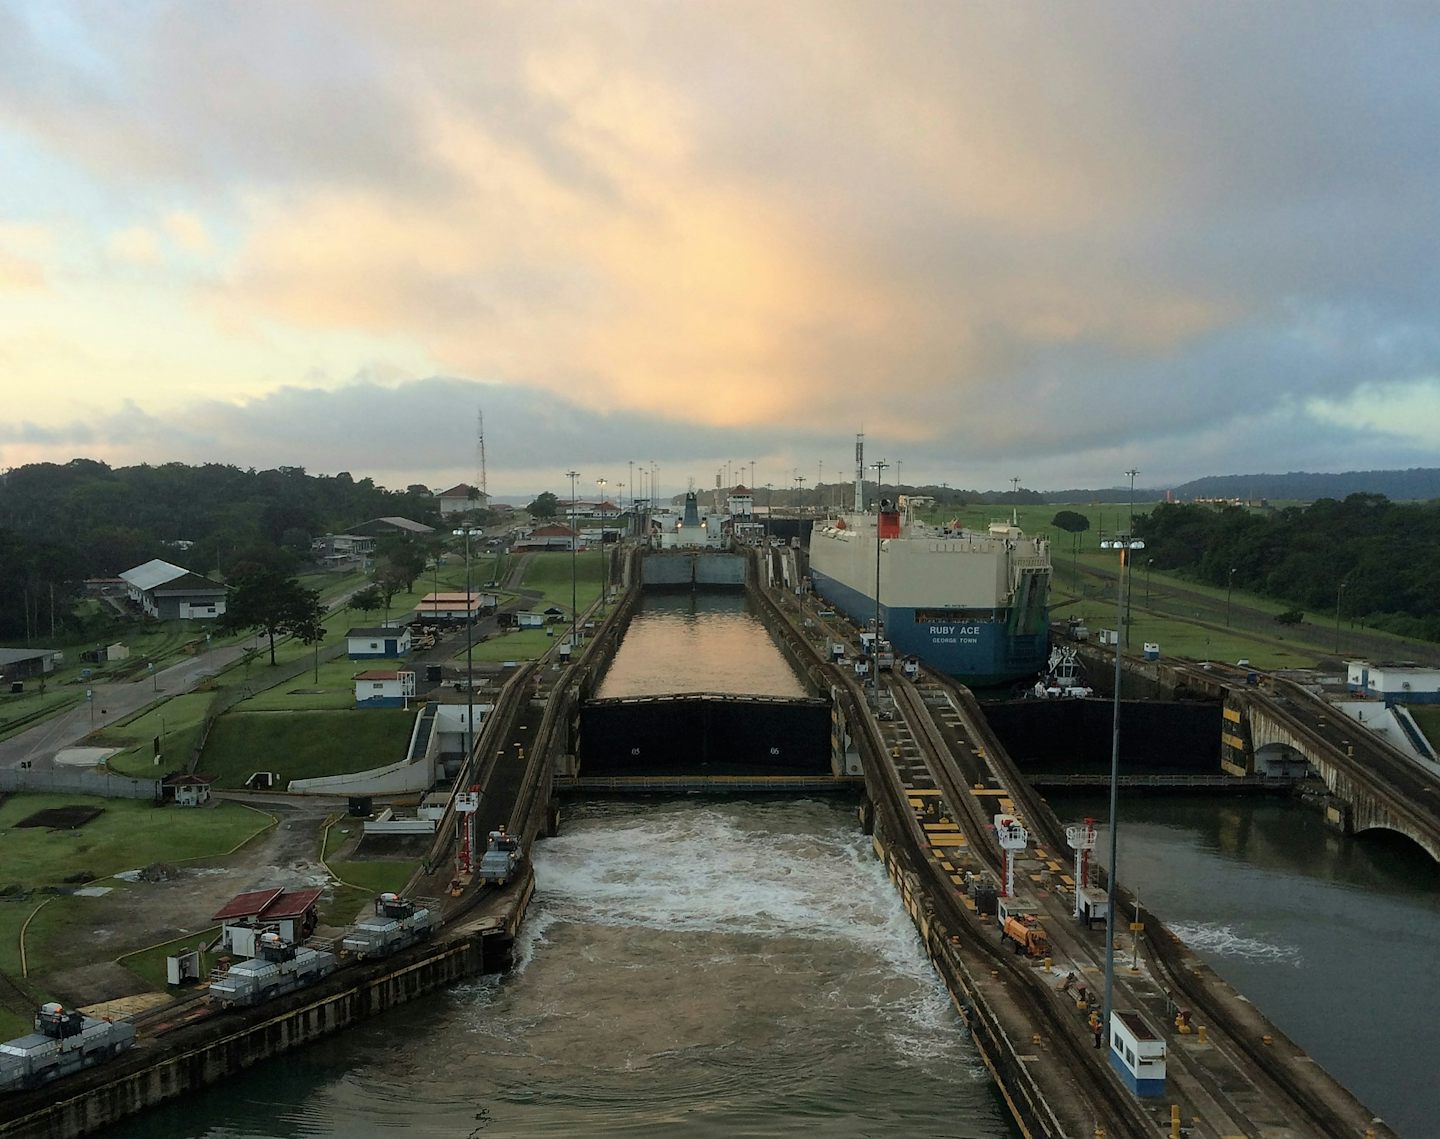 Going through the Panama Canal